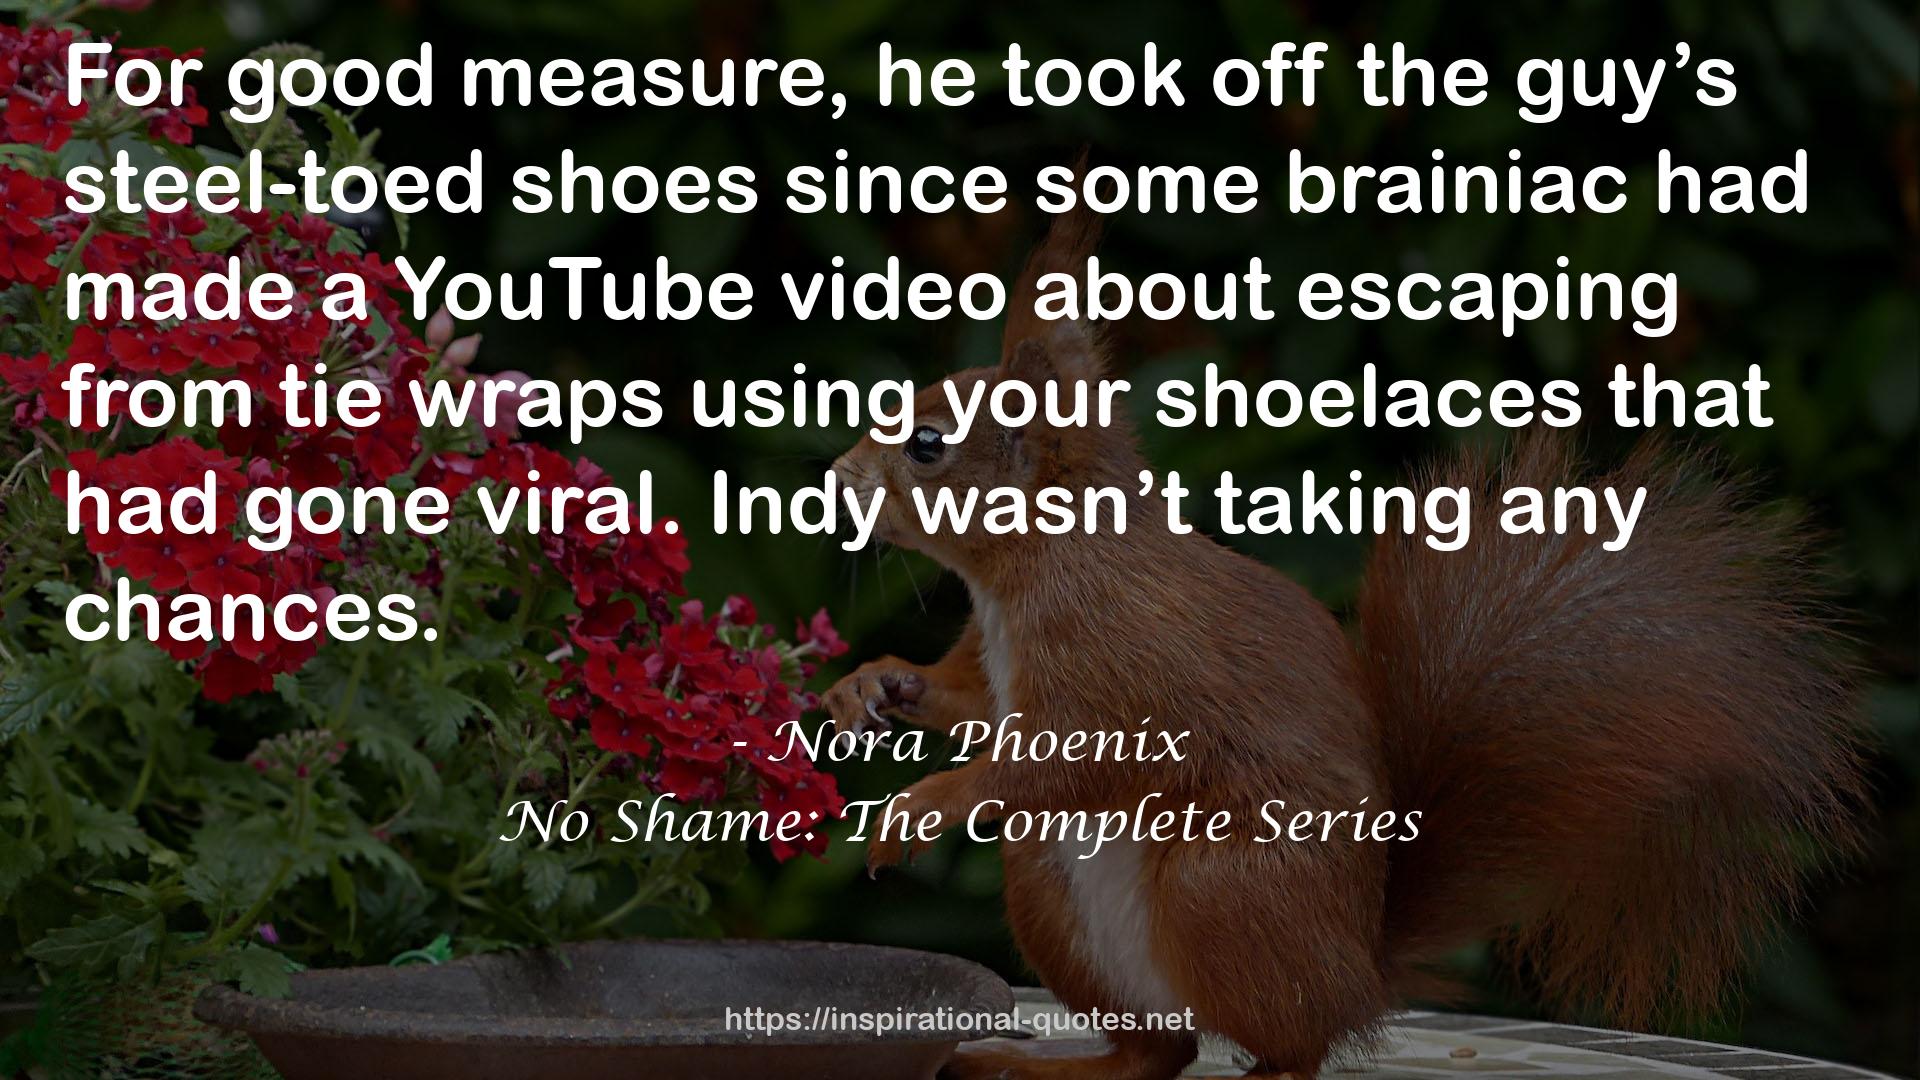 No Shame: The Complete Series QUOTES